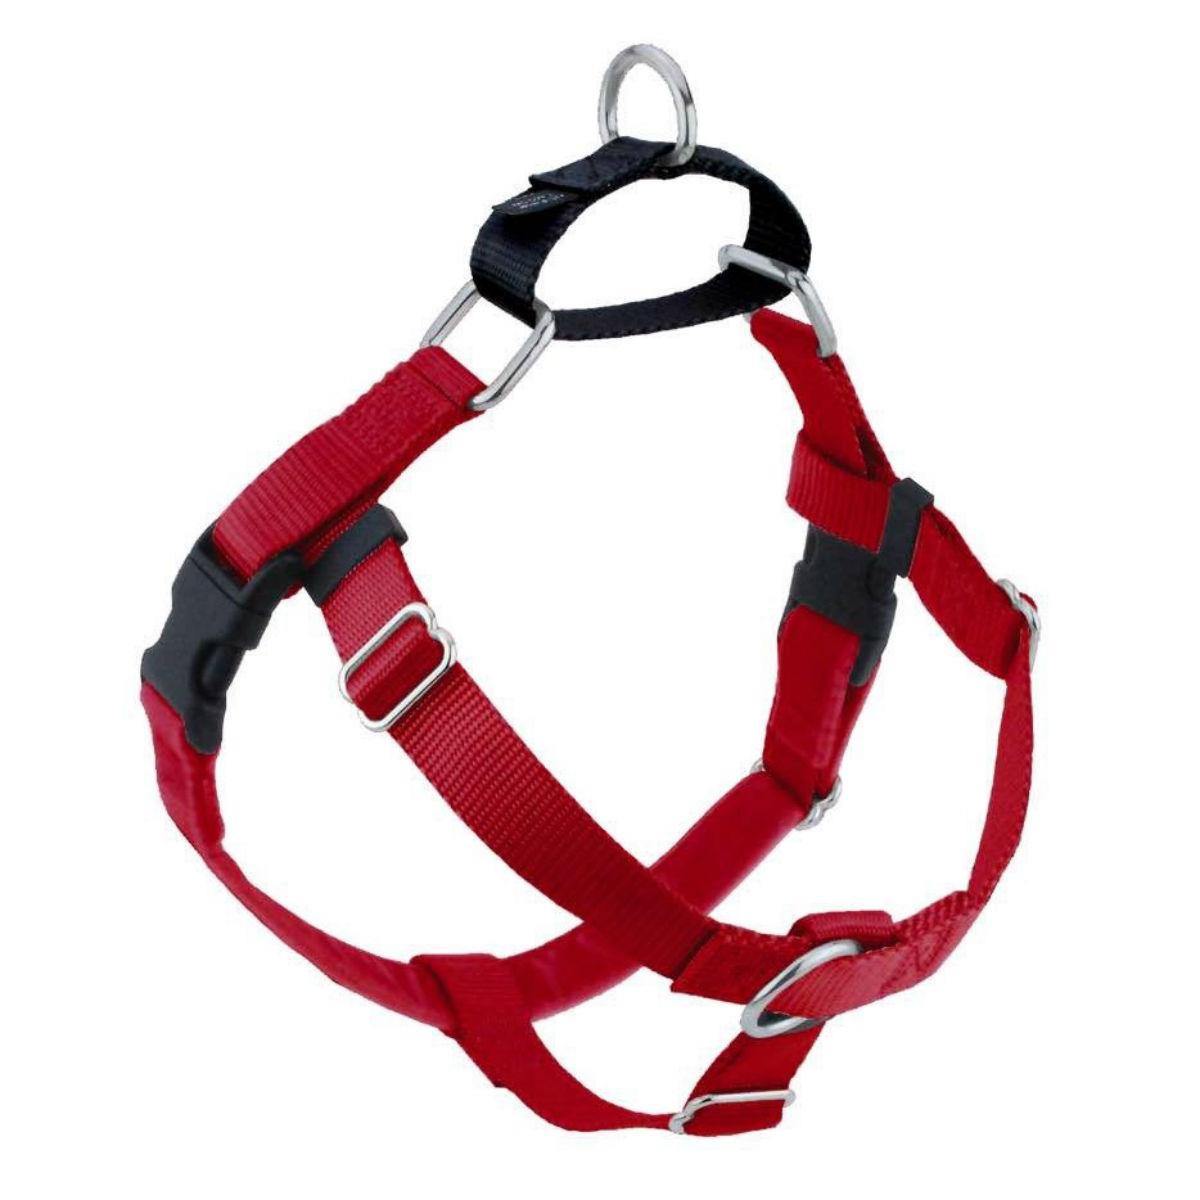 2 Hounds Design No-Pull Dog Harness Deluxe Training Package - Red and Black